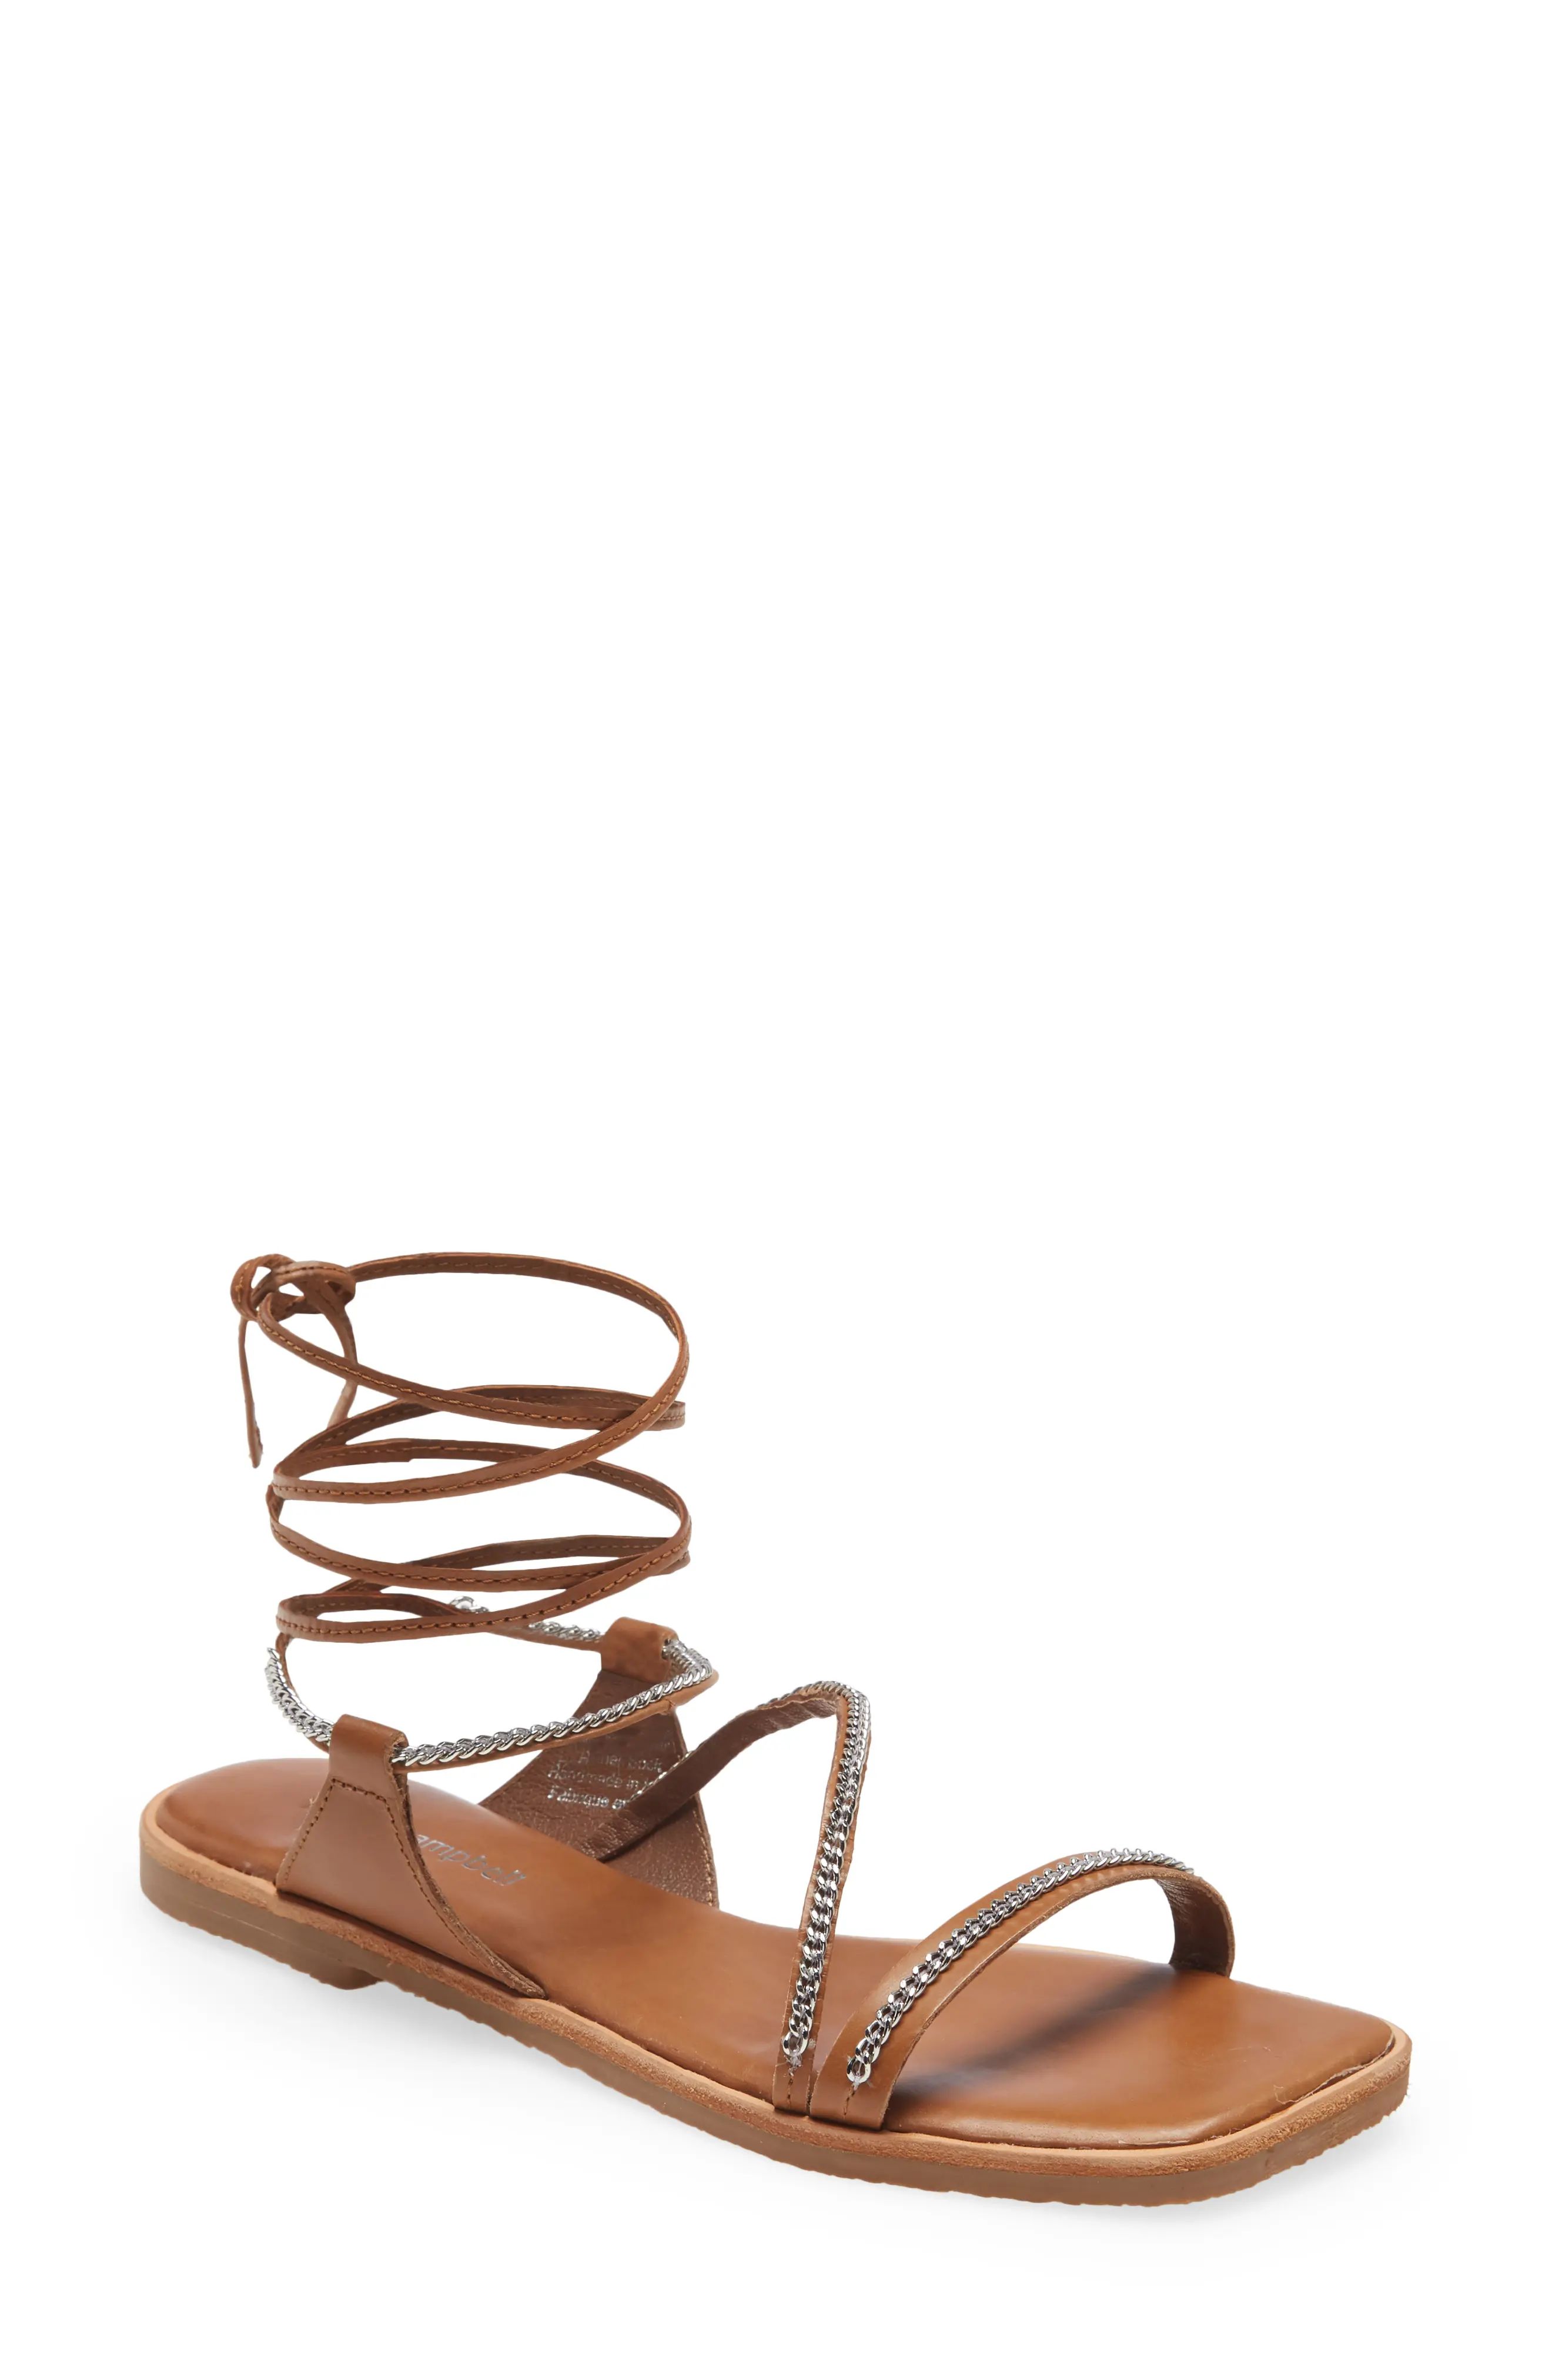 Jeffrey Campbell Moriah Lace-Up Sandal, Size 10 in Tan Leather at Nordstrom | Nordstrom